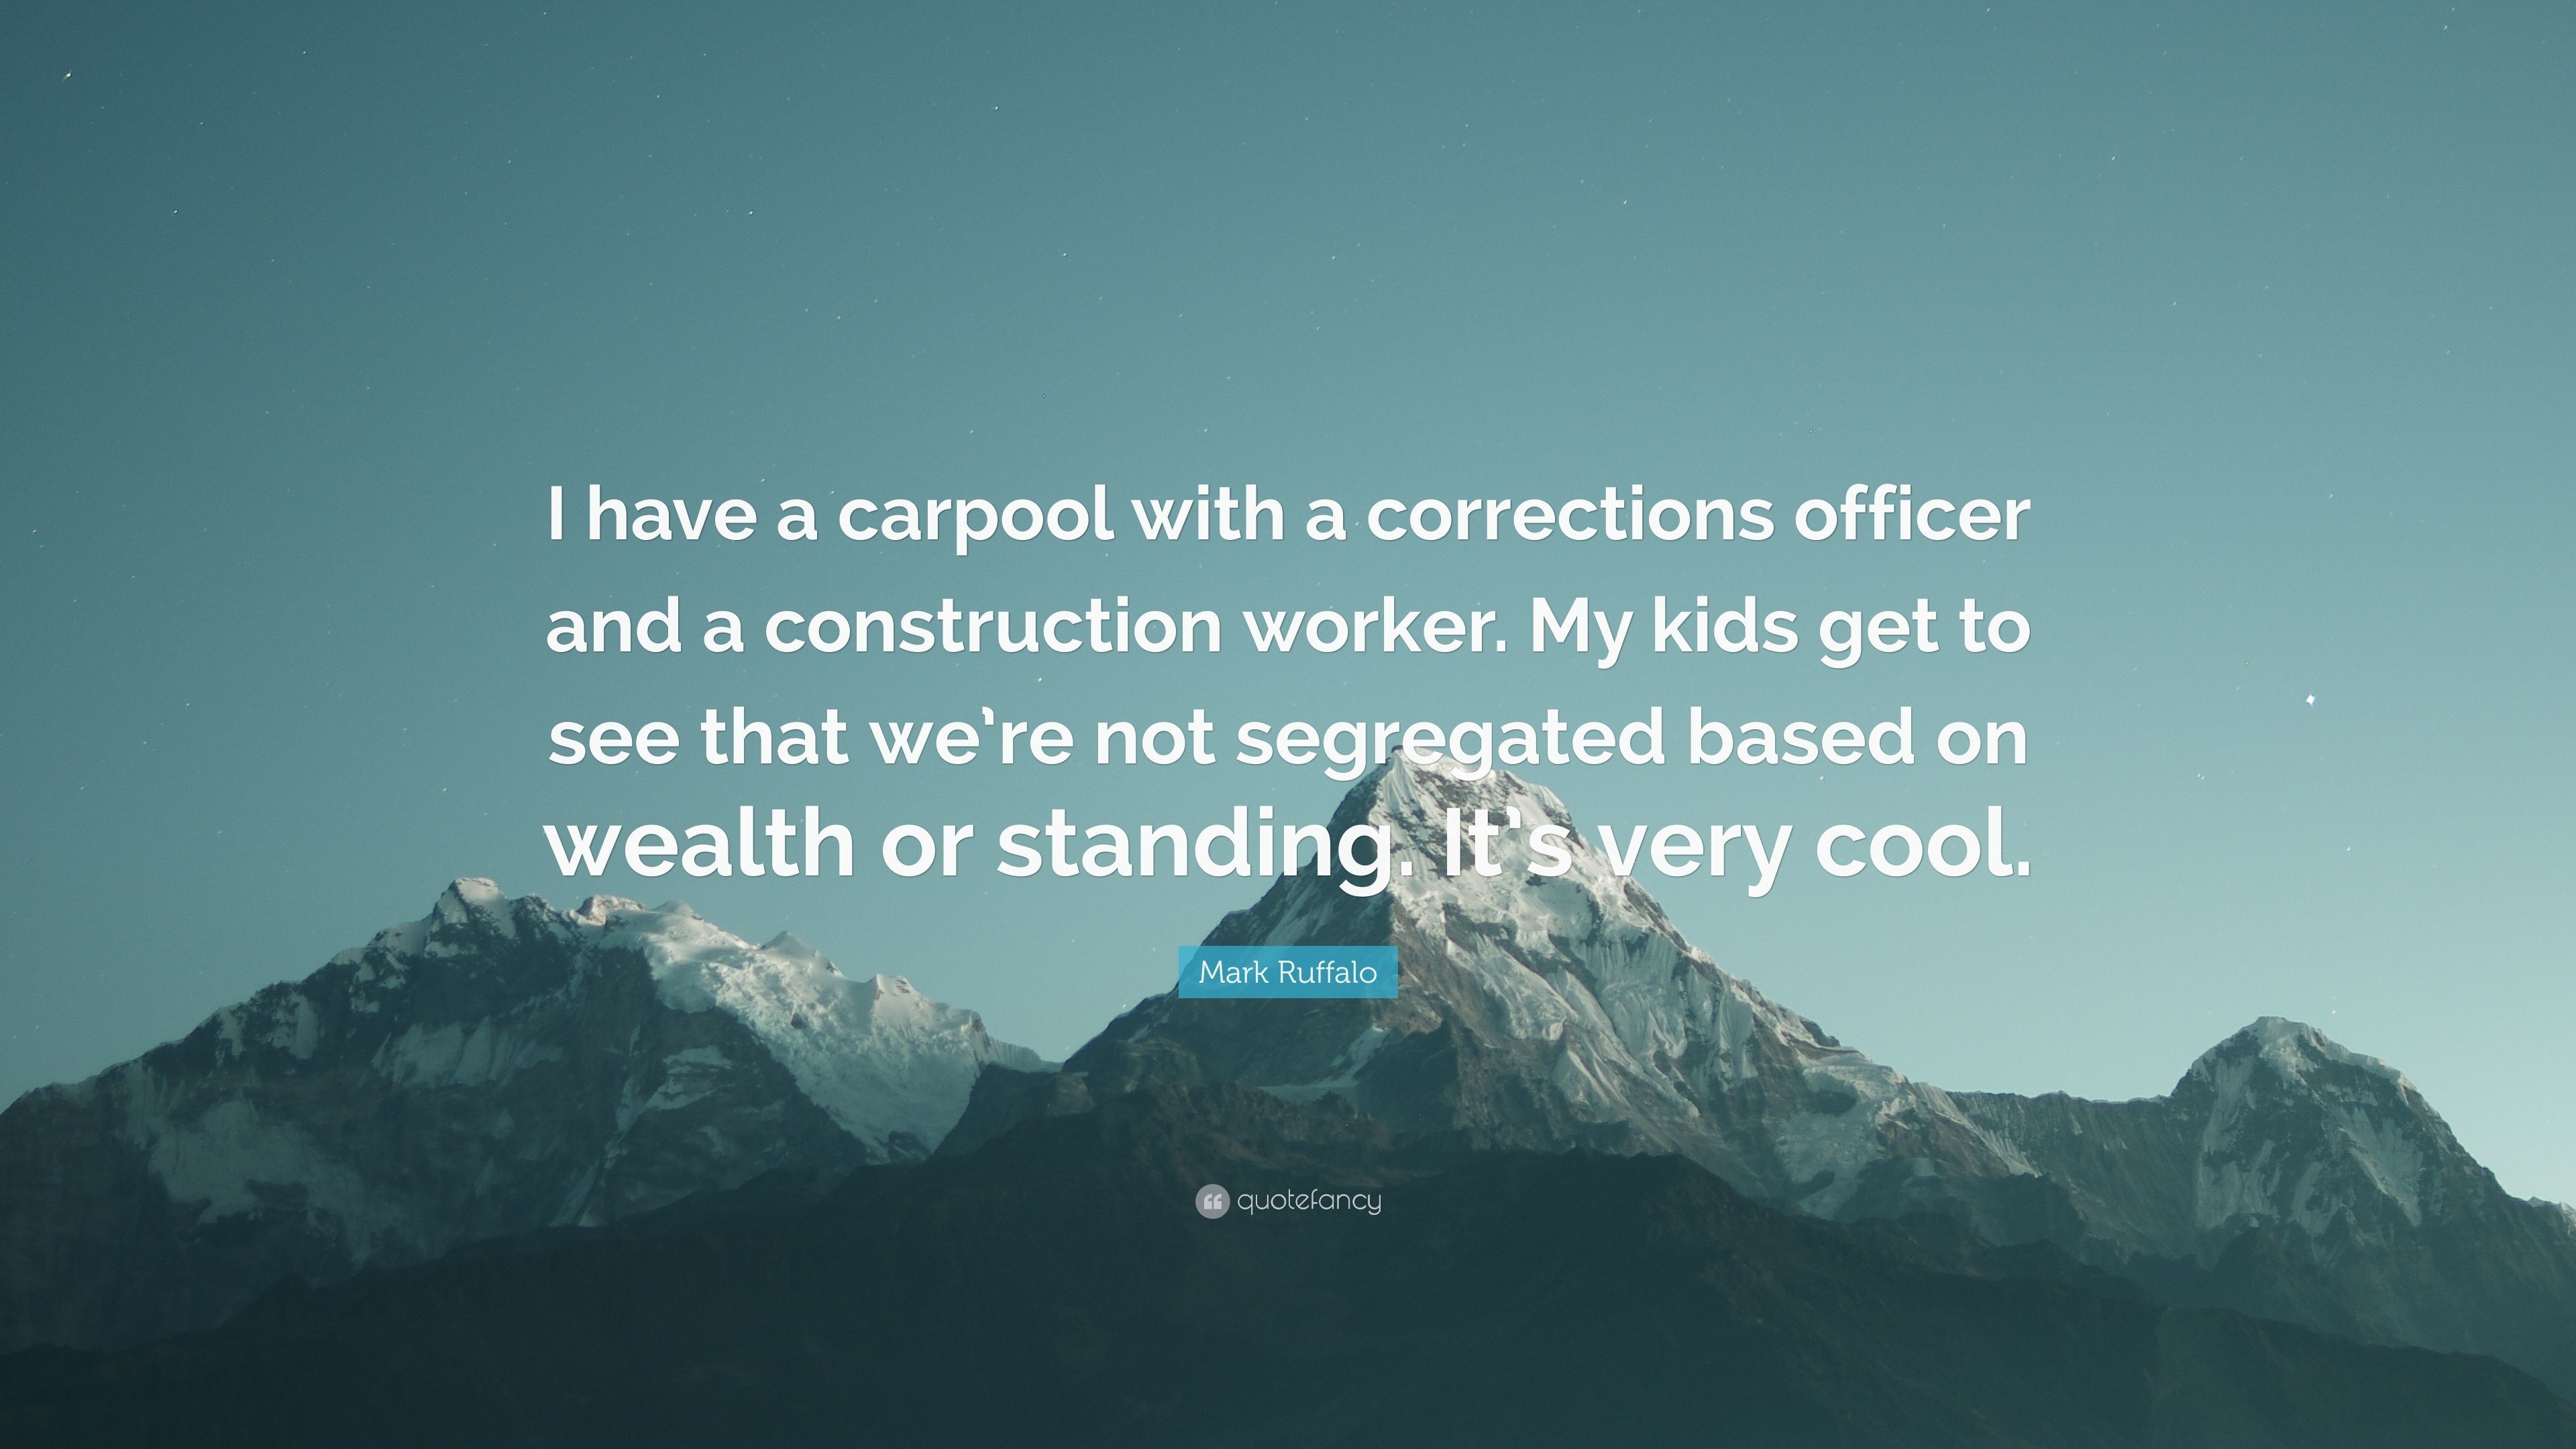 3840x2160 Mark Ruffalo Quote: “I have a carpool with a corrections officer and a  construction